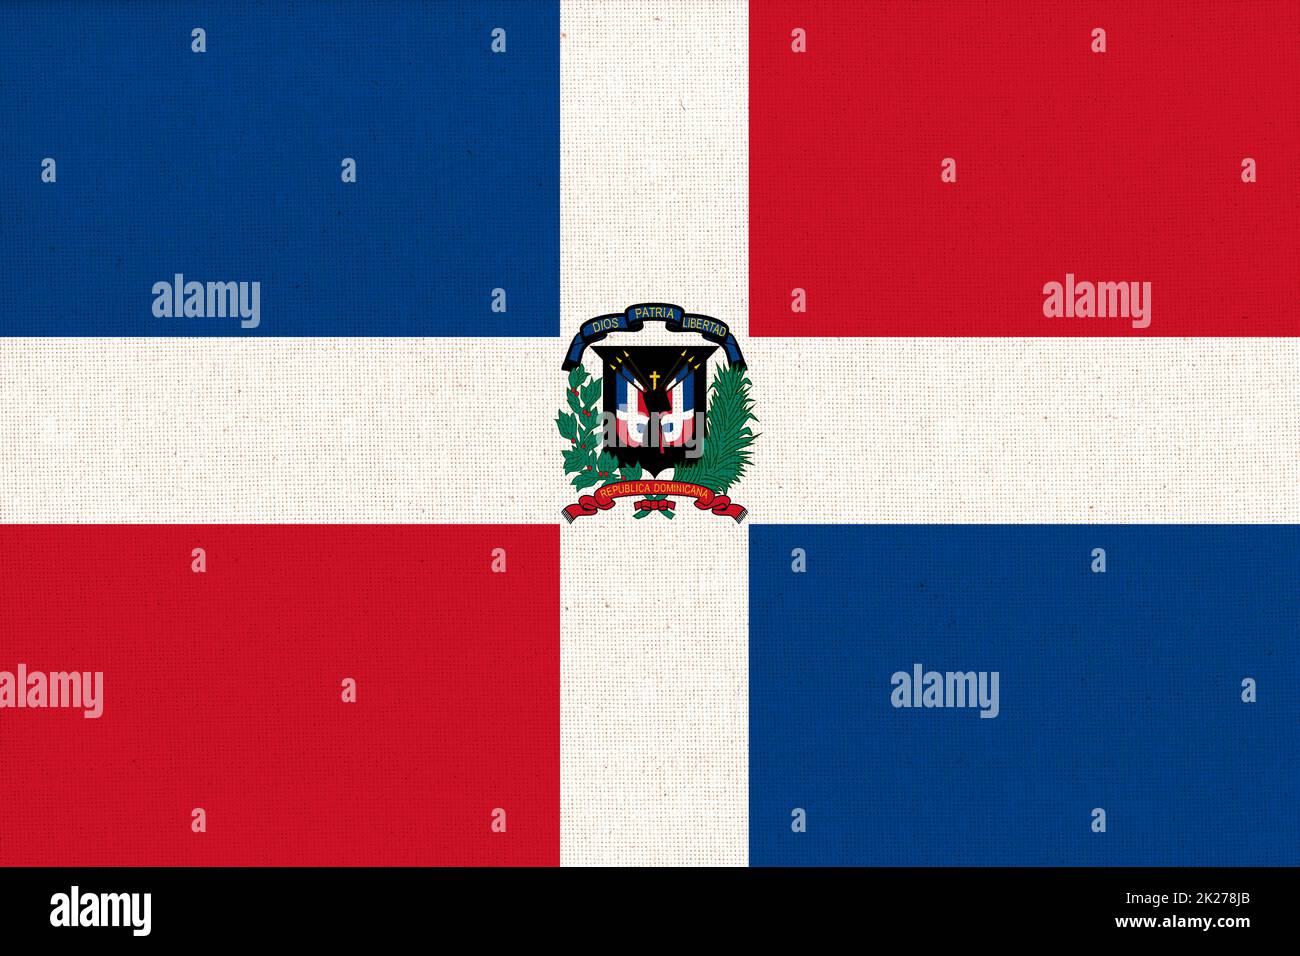 flag of Dominican Republic. National flag of Dominican Republic on fabric Stock Photo